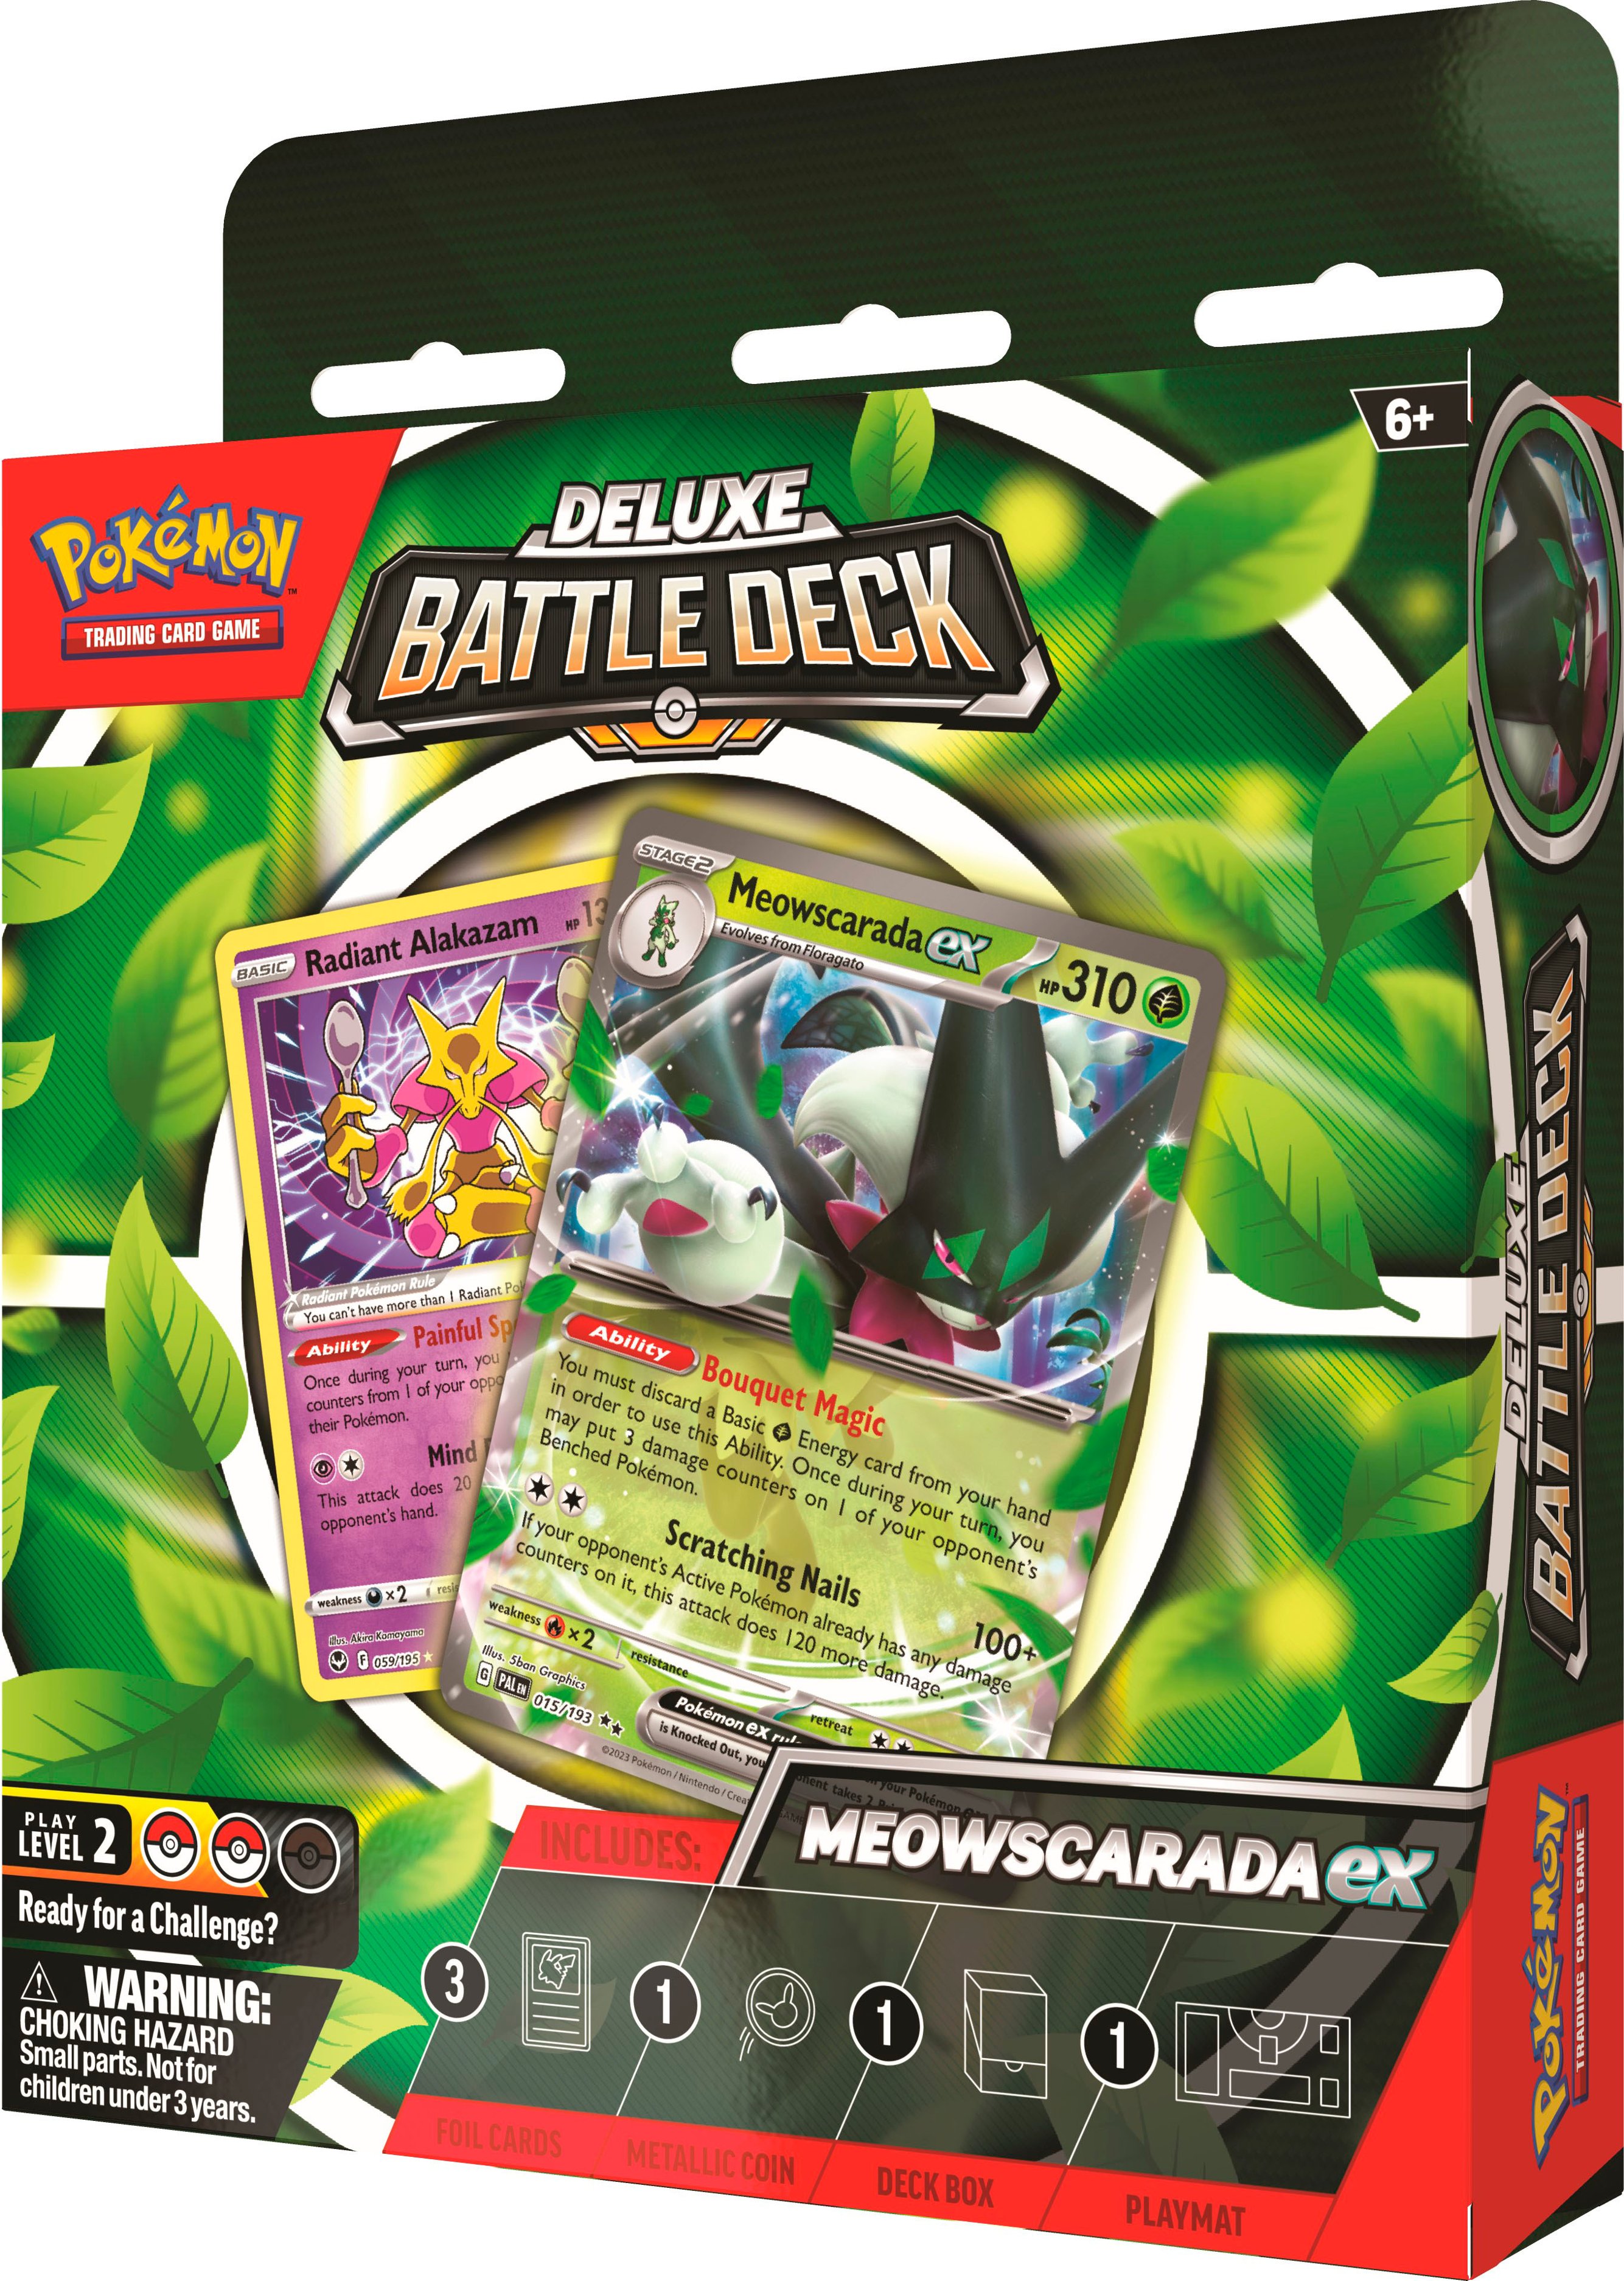 Pokémon Trading Card Game: Deluxe Battle Deck (Meowscarada or Quaquaval ex)  Styles May Vary 290-87258 - Best Buy